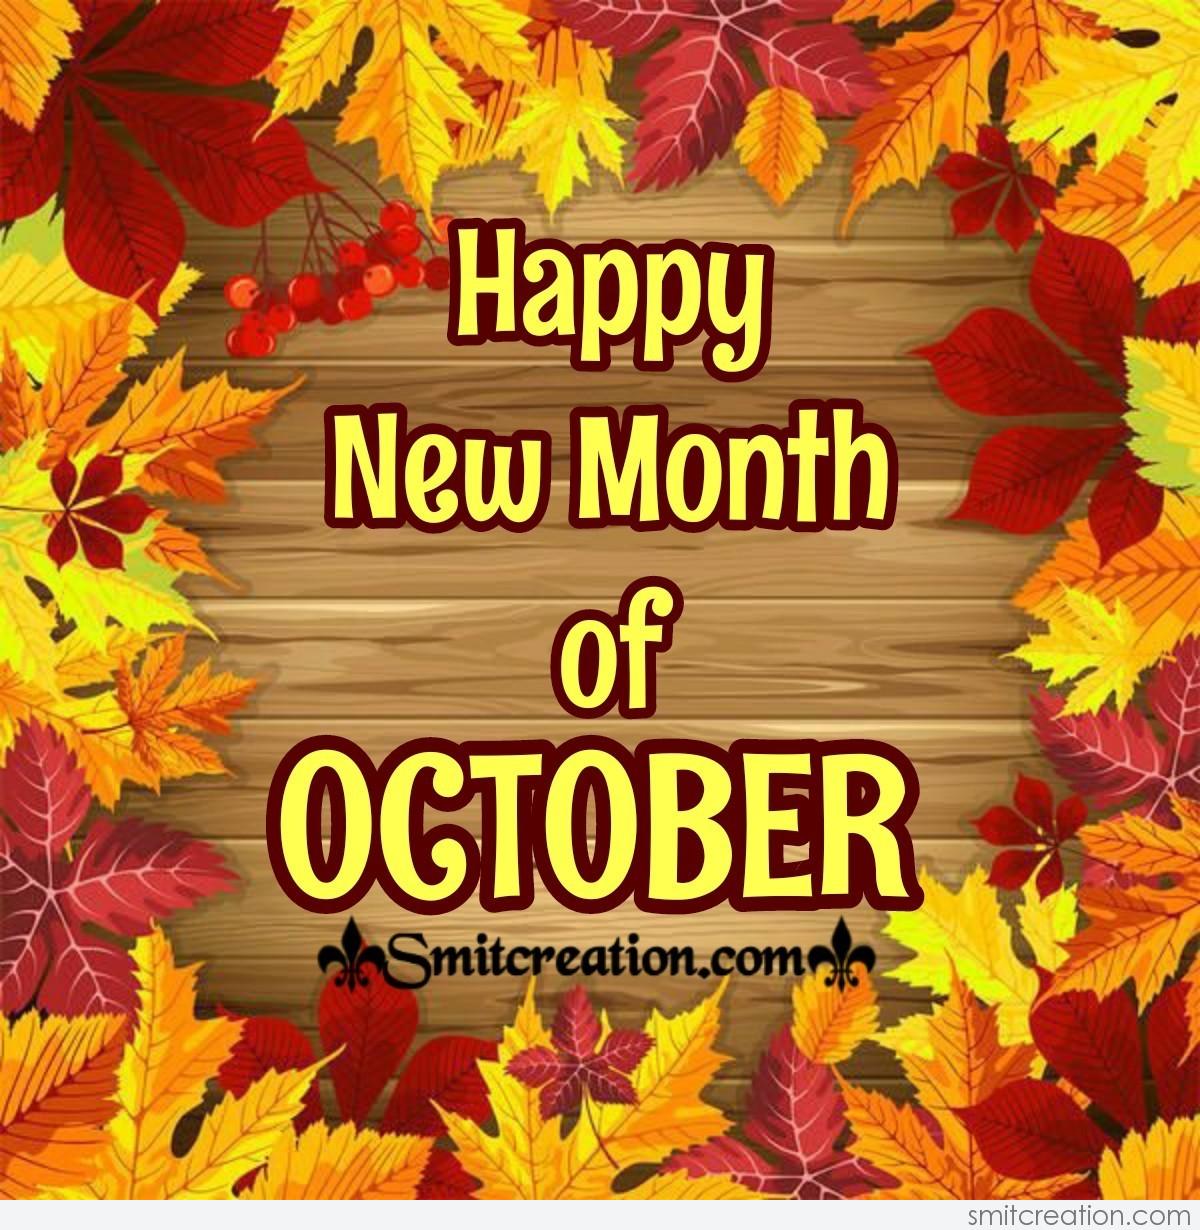 New Month / 100 Happy New Month Messages, Wishes, Prayers For February